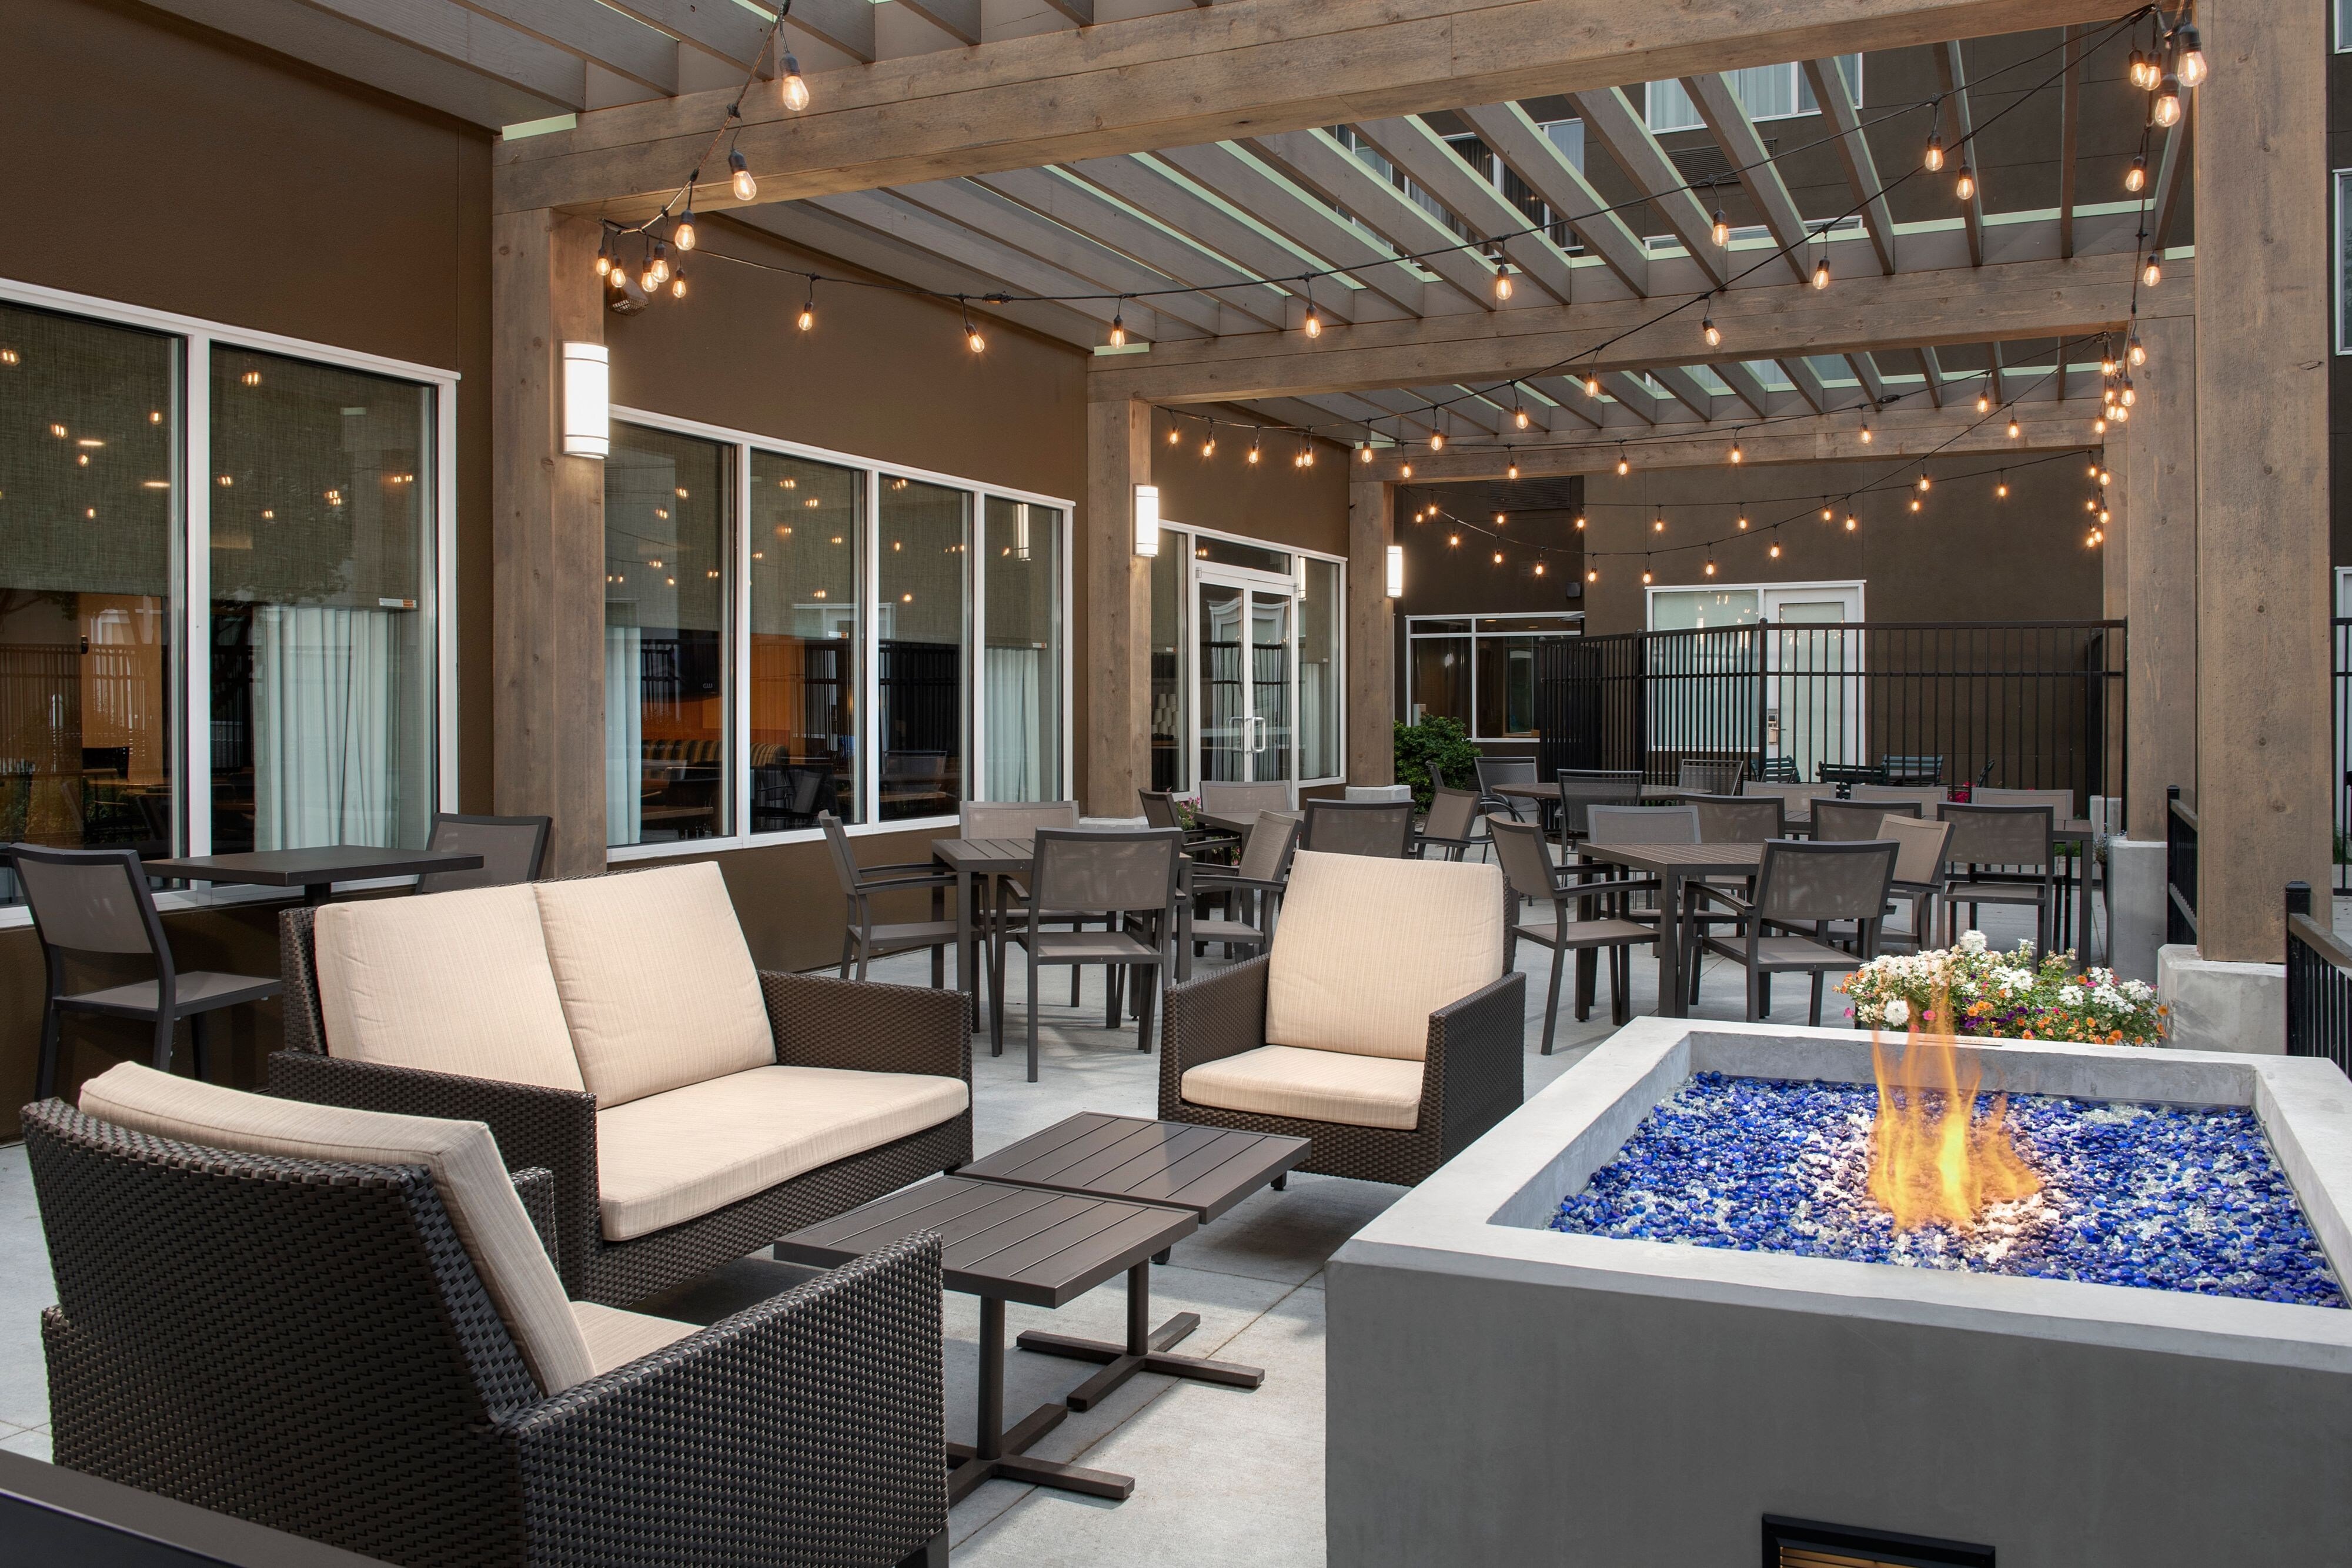 Outdoor Patio and Firepit